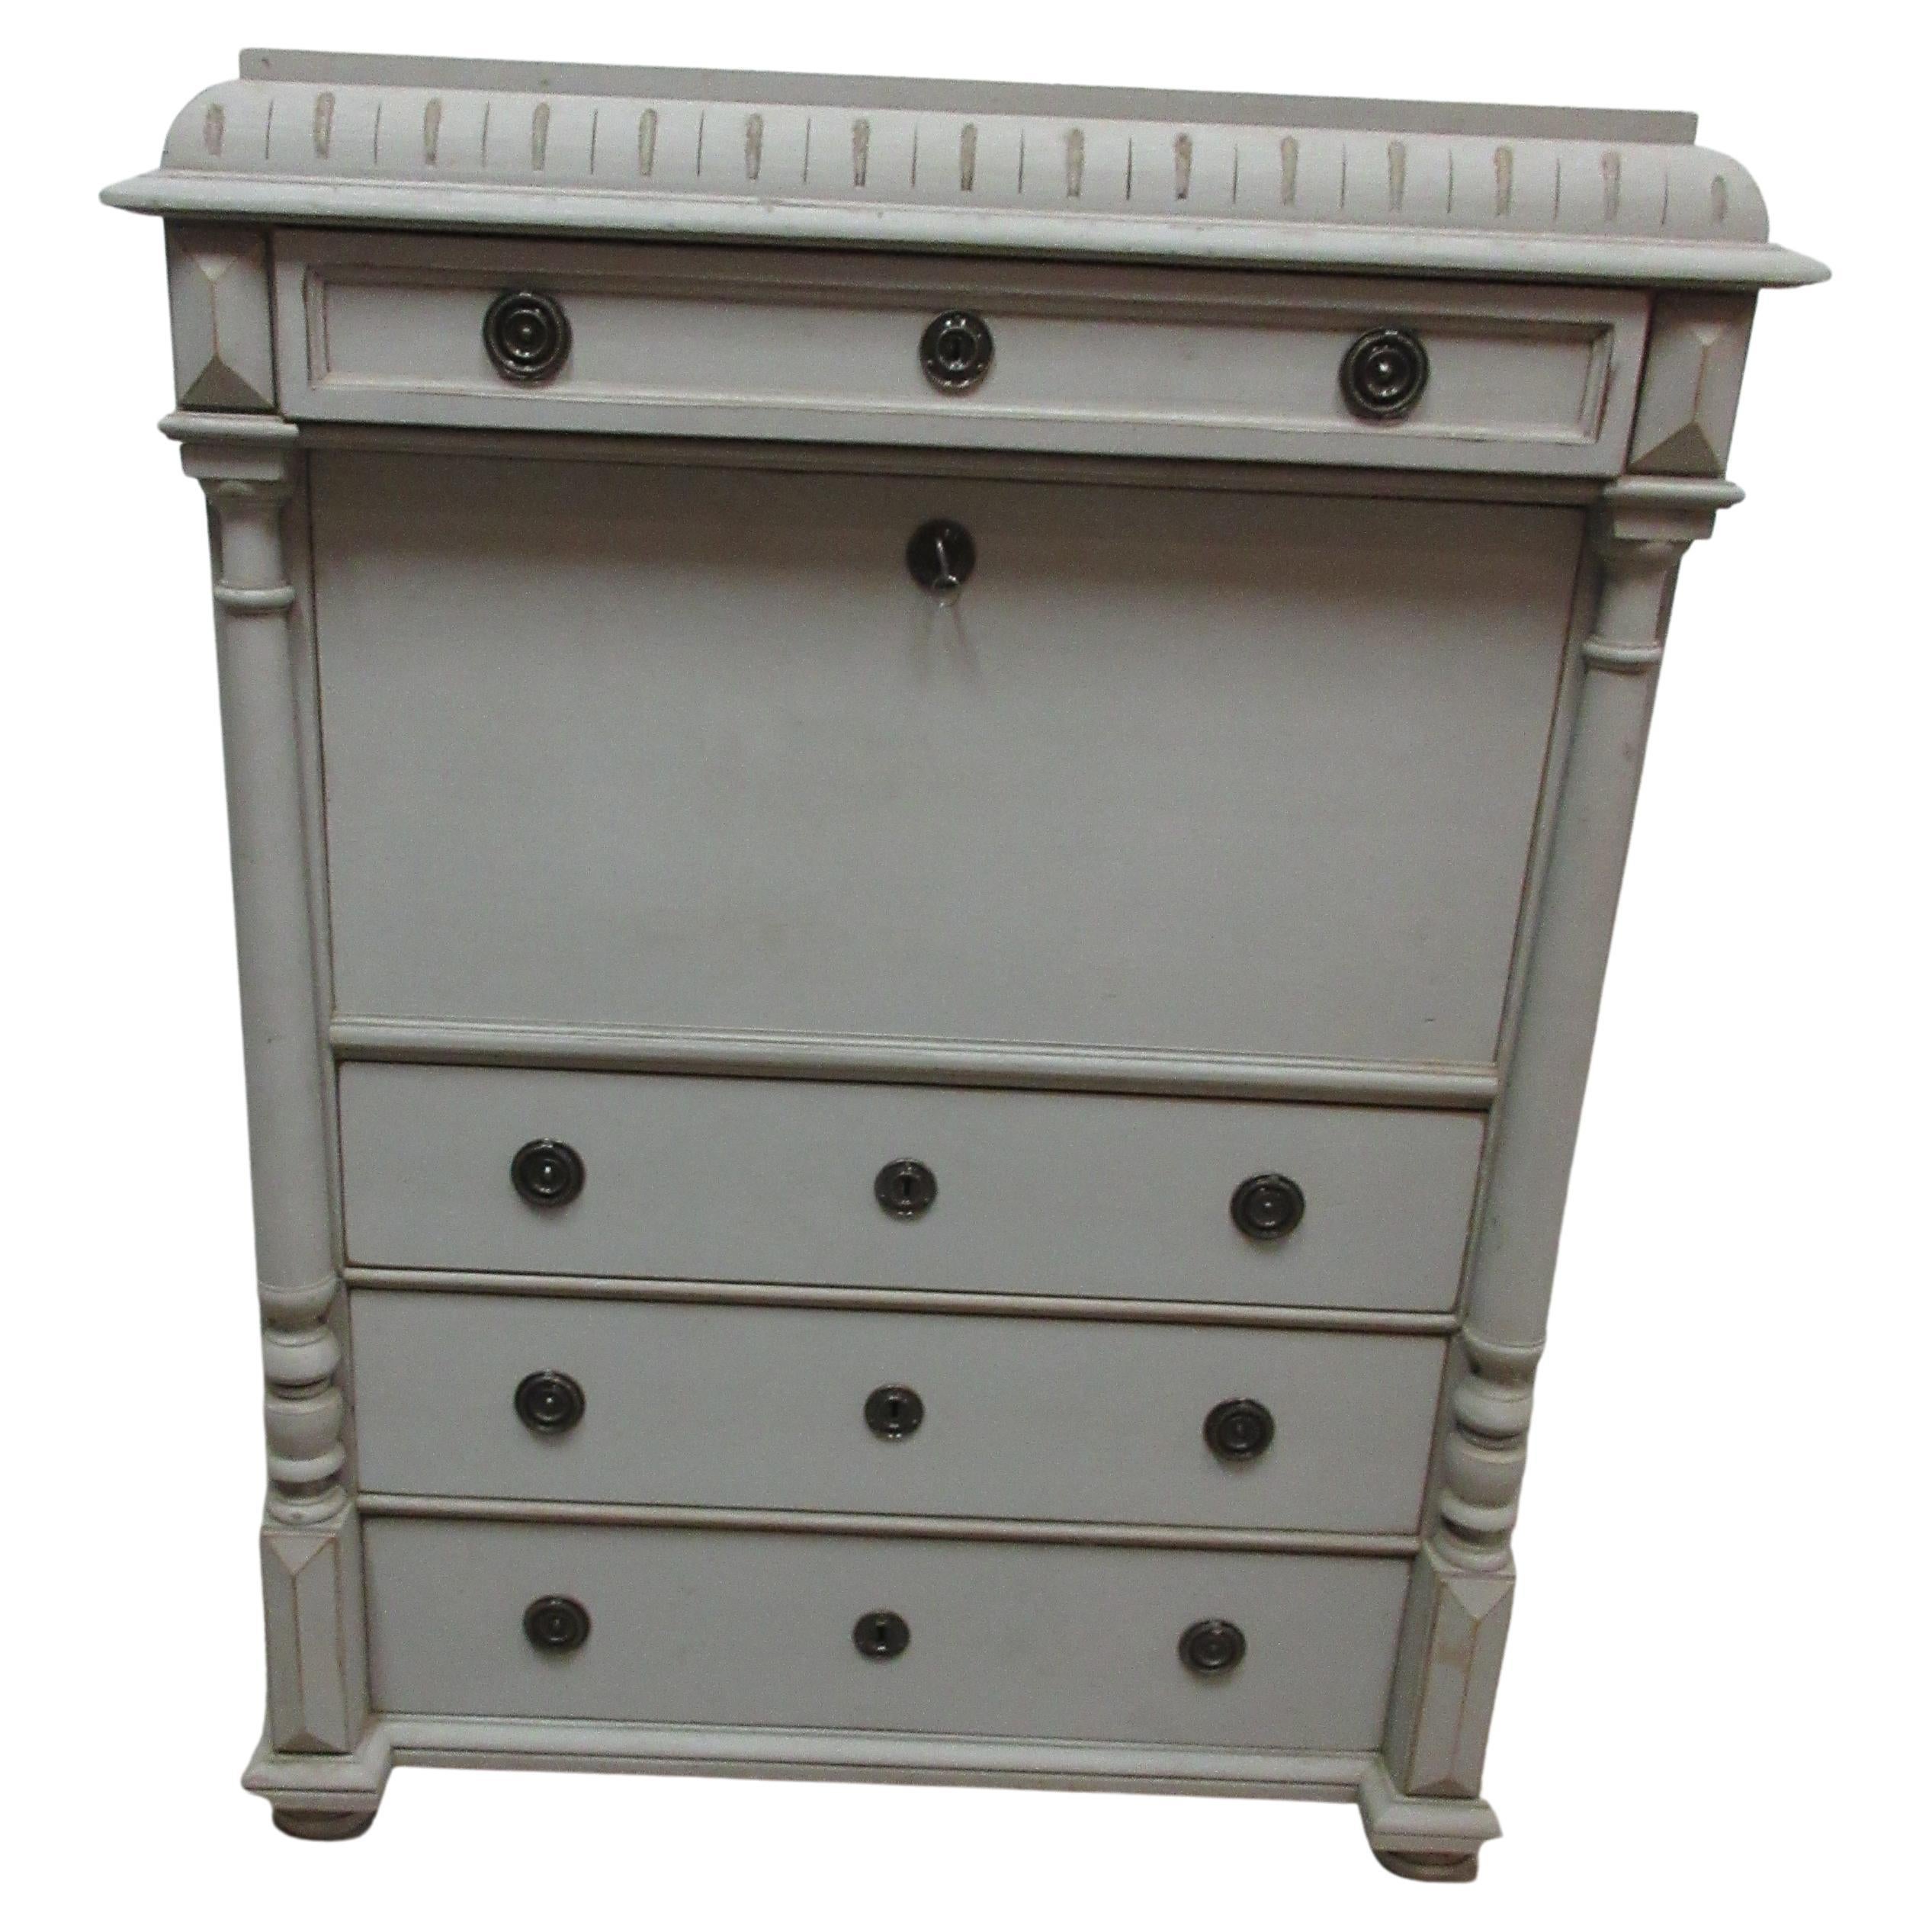 This is a Swedish Gustavian style drop front desk , its been restored and repainted with Milk Paints 